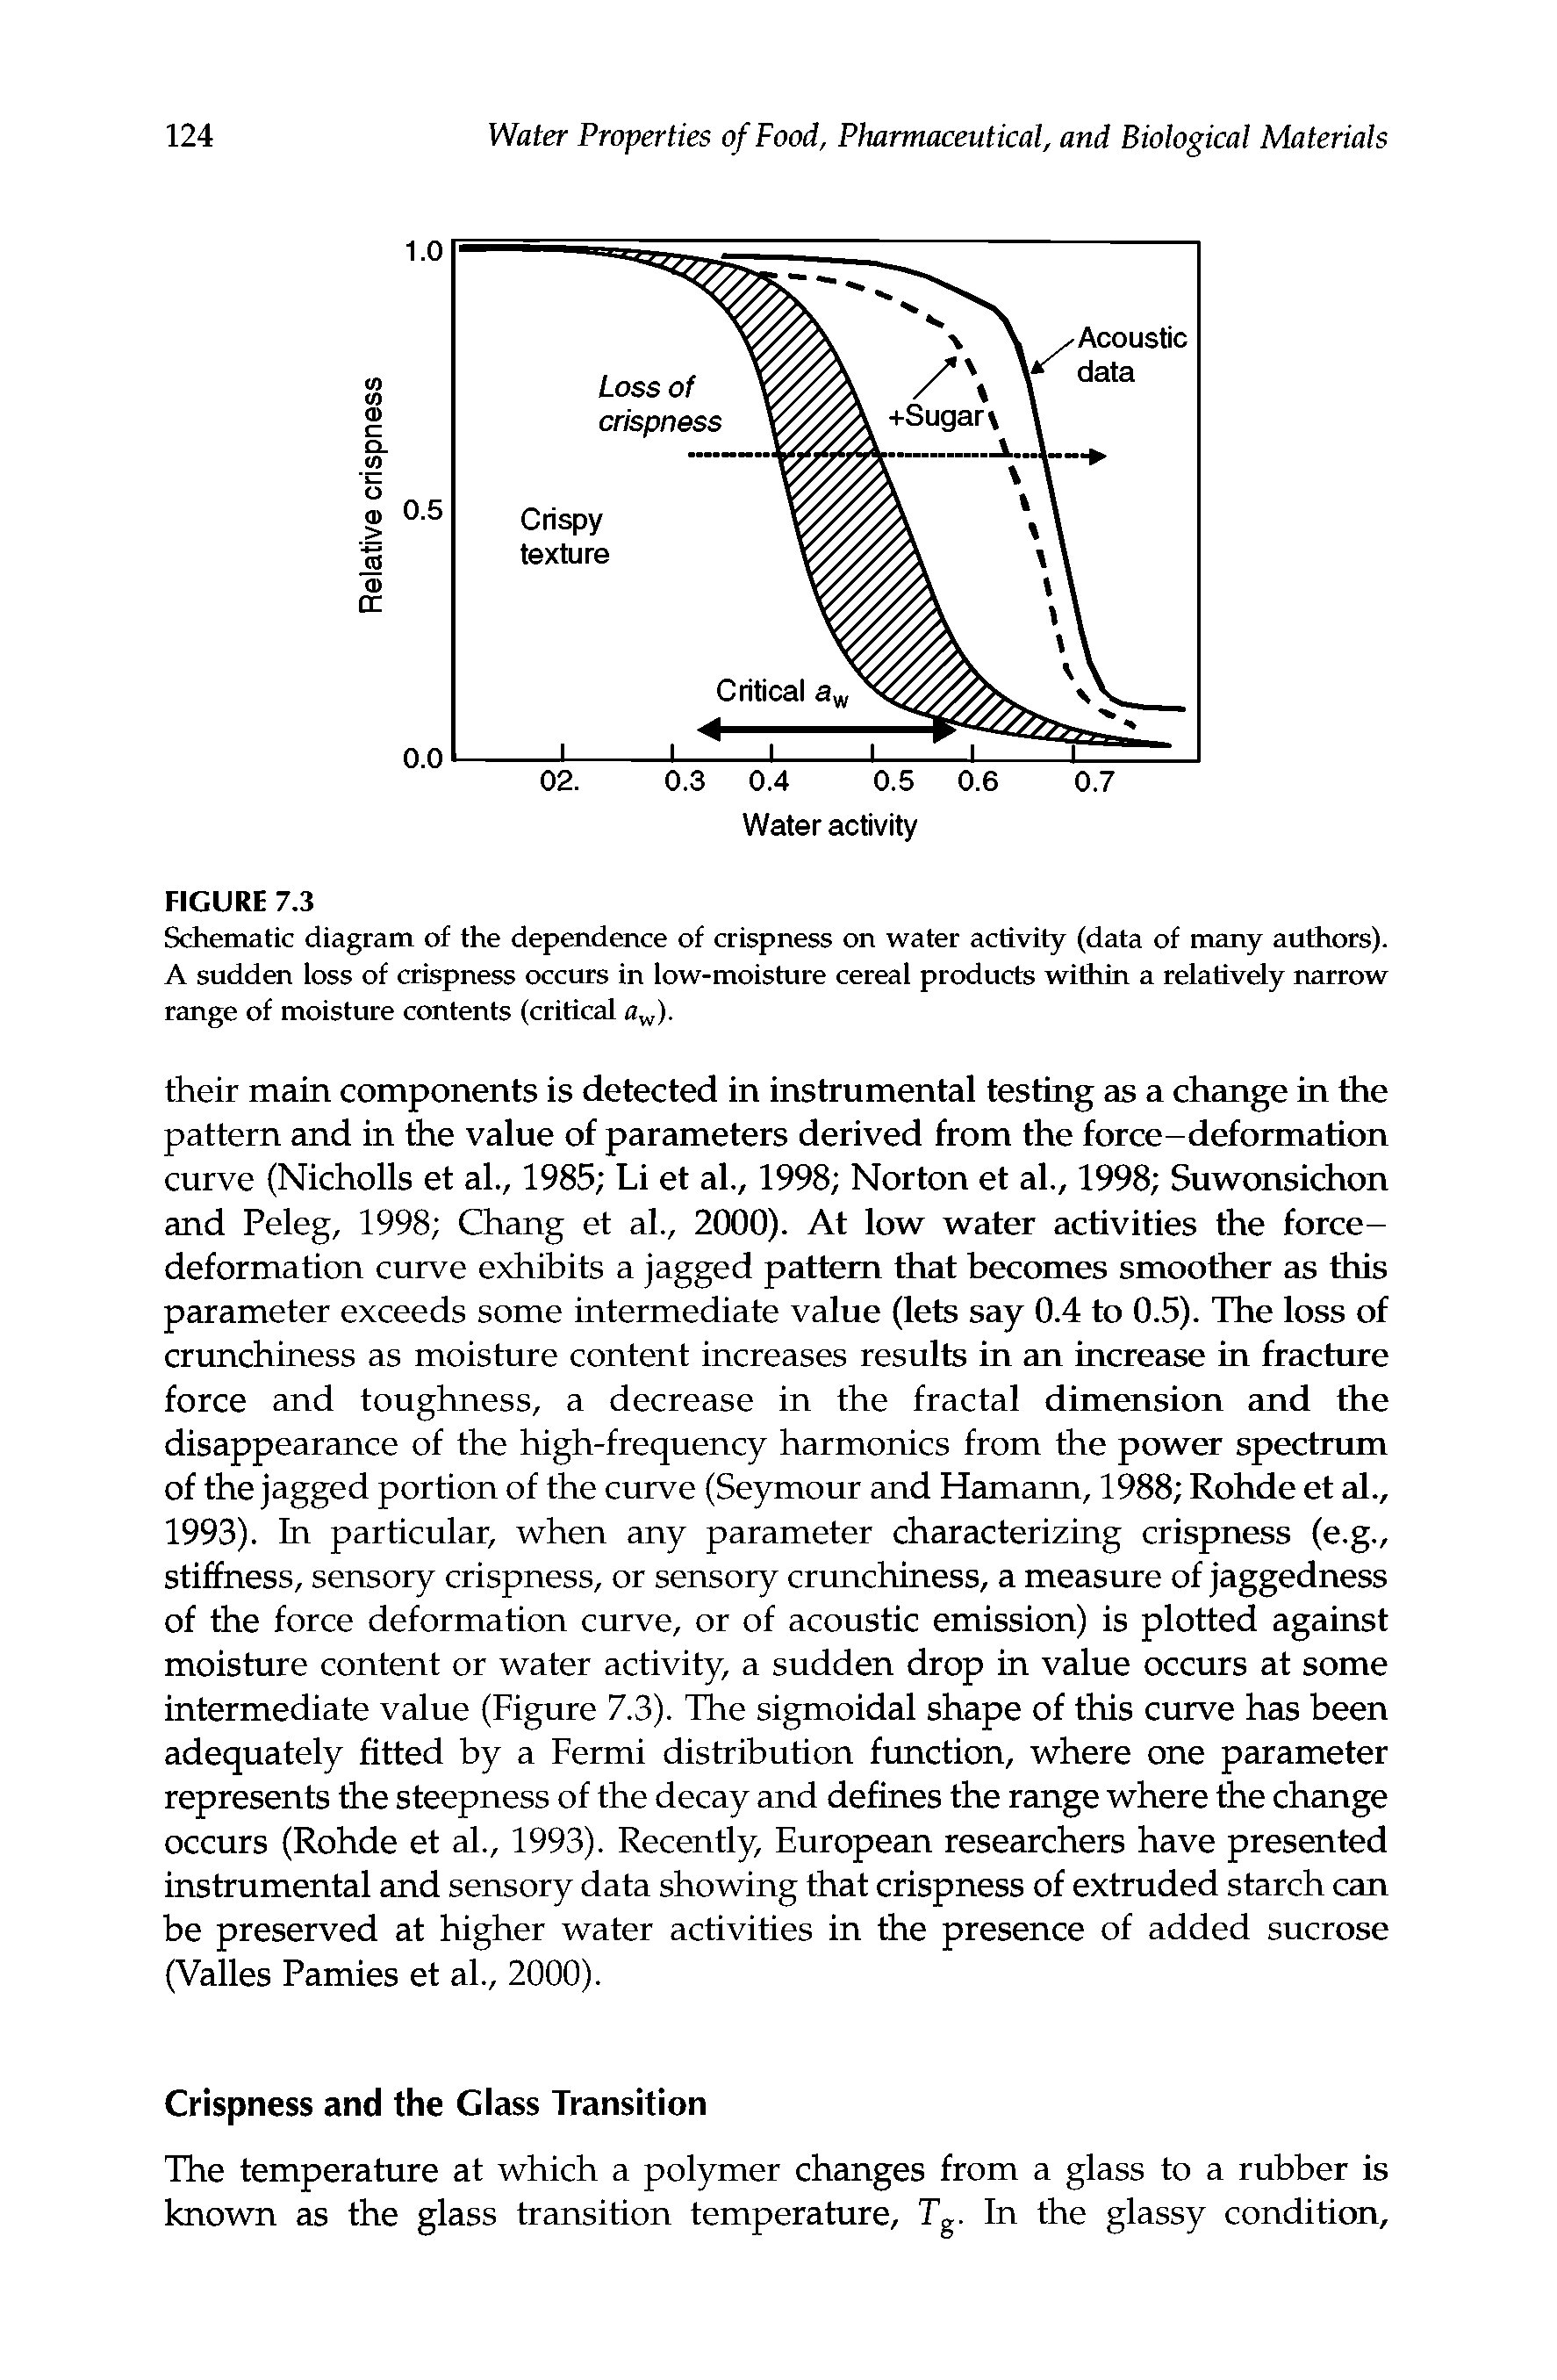 Schematic diagram of the dependence of crispness on water activity (data of many authors). A sudden loss of crispness occurs in low-moisture cereal products within a relatively narrow range of moisture contents (critical fl ).